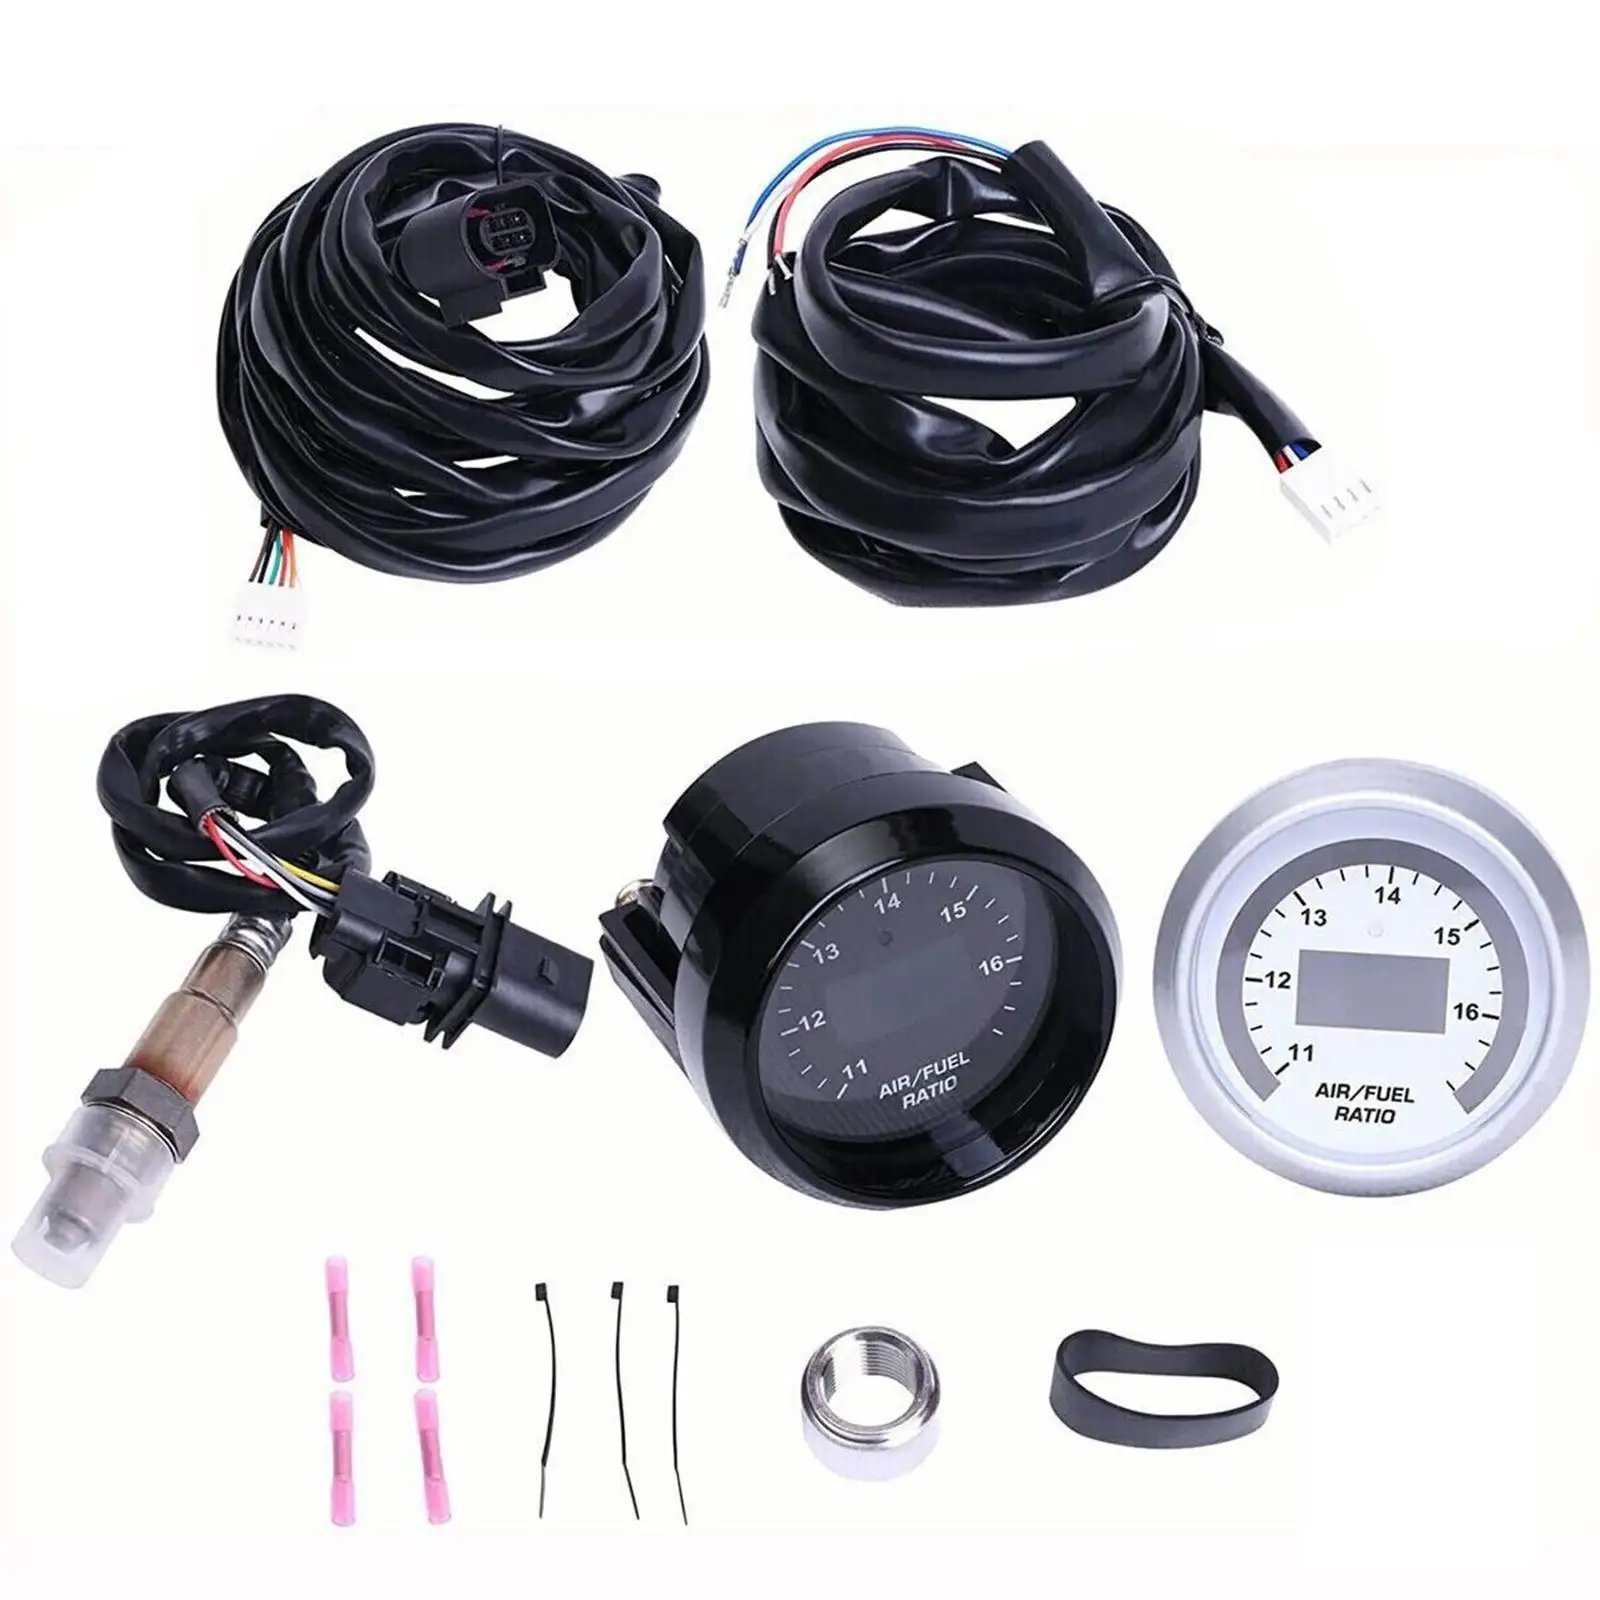 Air Fuel Ratio Gauge Kit Data Logging with 4.9 Sensor Replacement Repair Parts Spare Parts Easy Installation Durable 30-4110